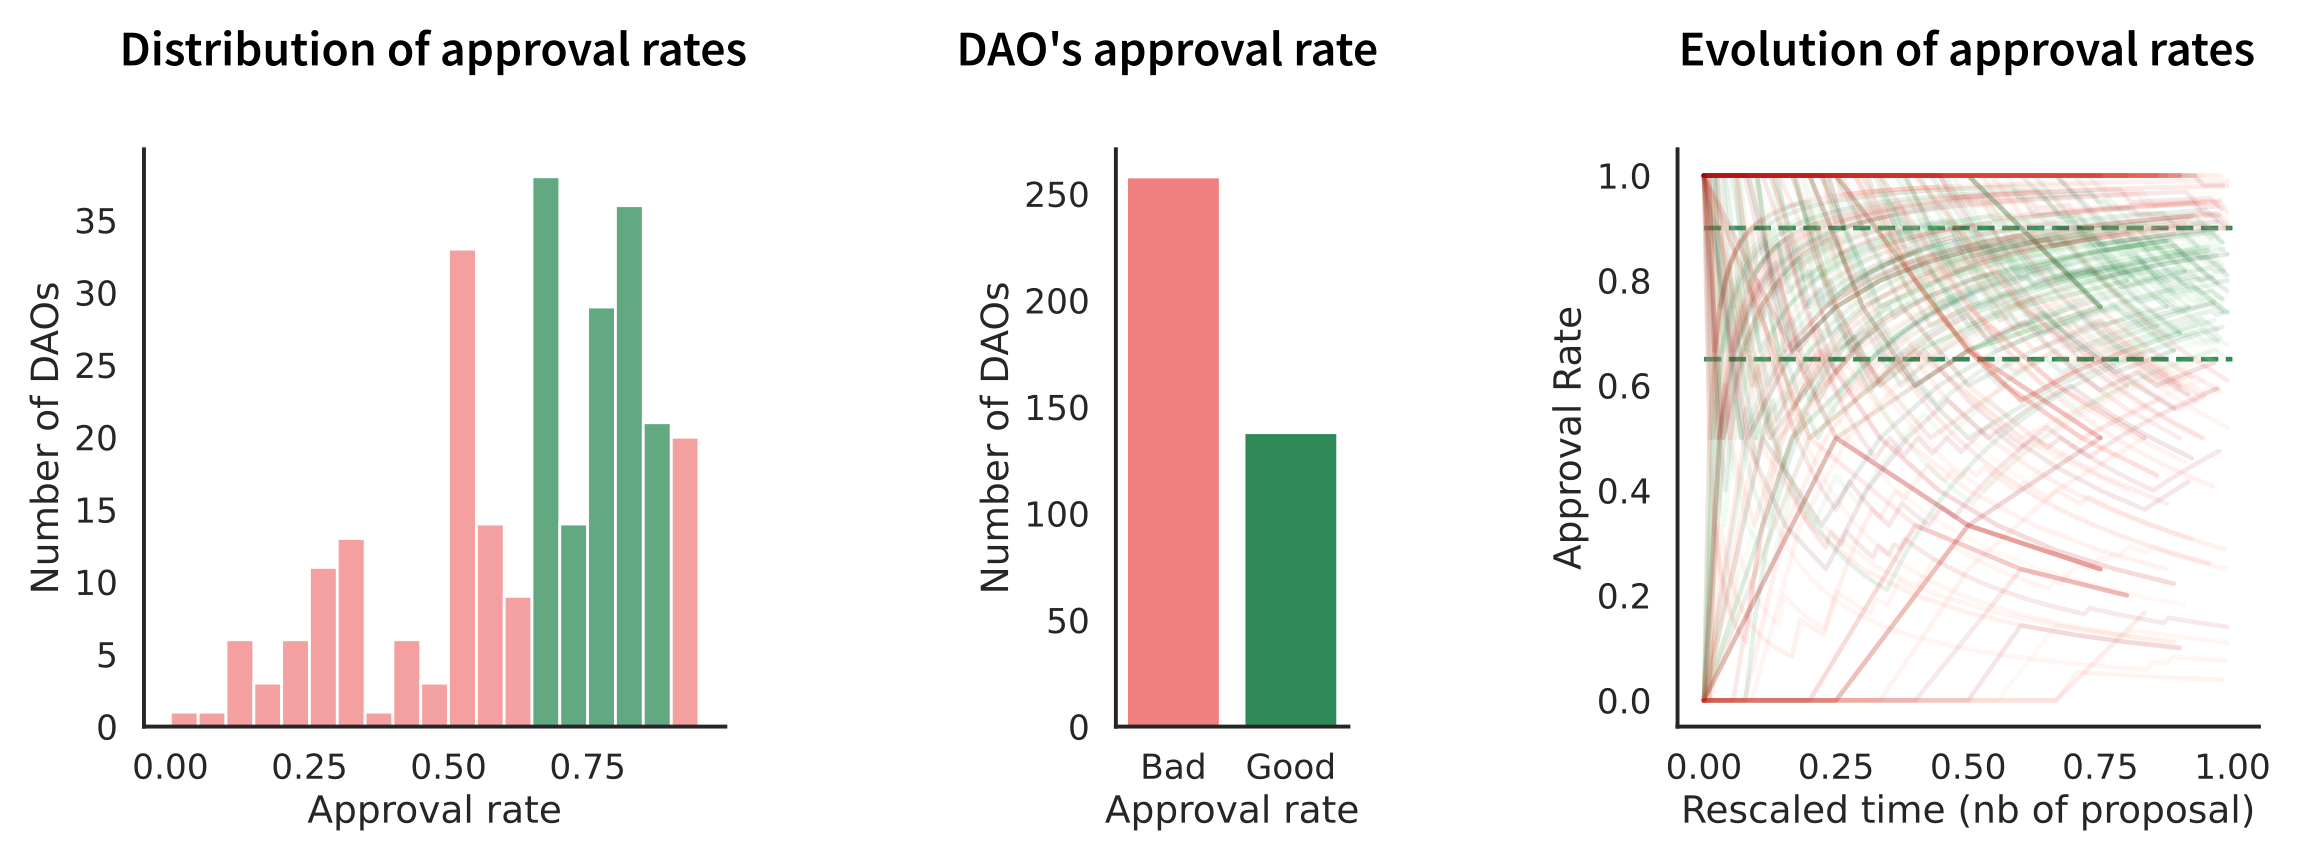 Analysis of approval rate across DAOs of DAOHaus. The rescaled time axis is proportional to the number of proposals a DAO has made, normalized by the final amount. In red are DAOs that fall outside the range at the latest time, and green are DAOs that fall within the 65-90% at the latest time.